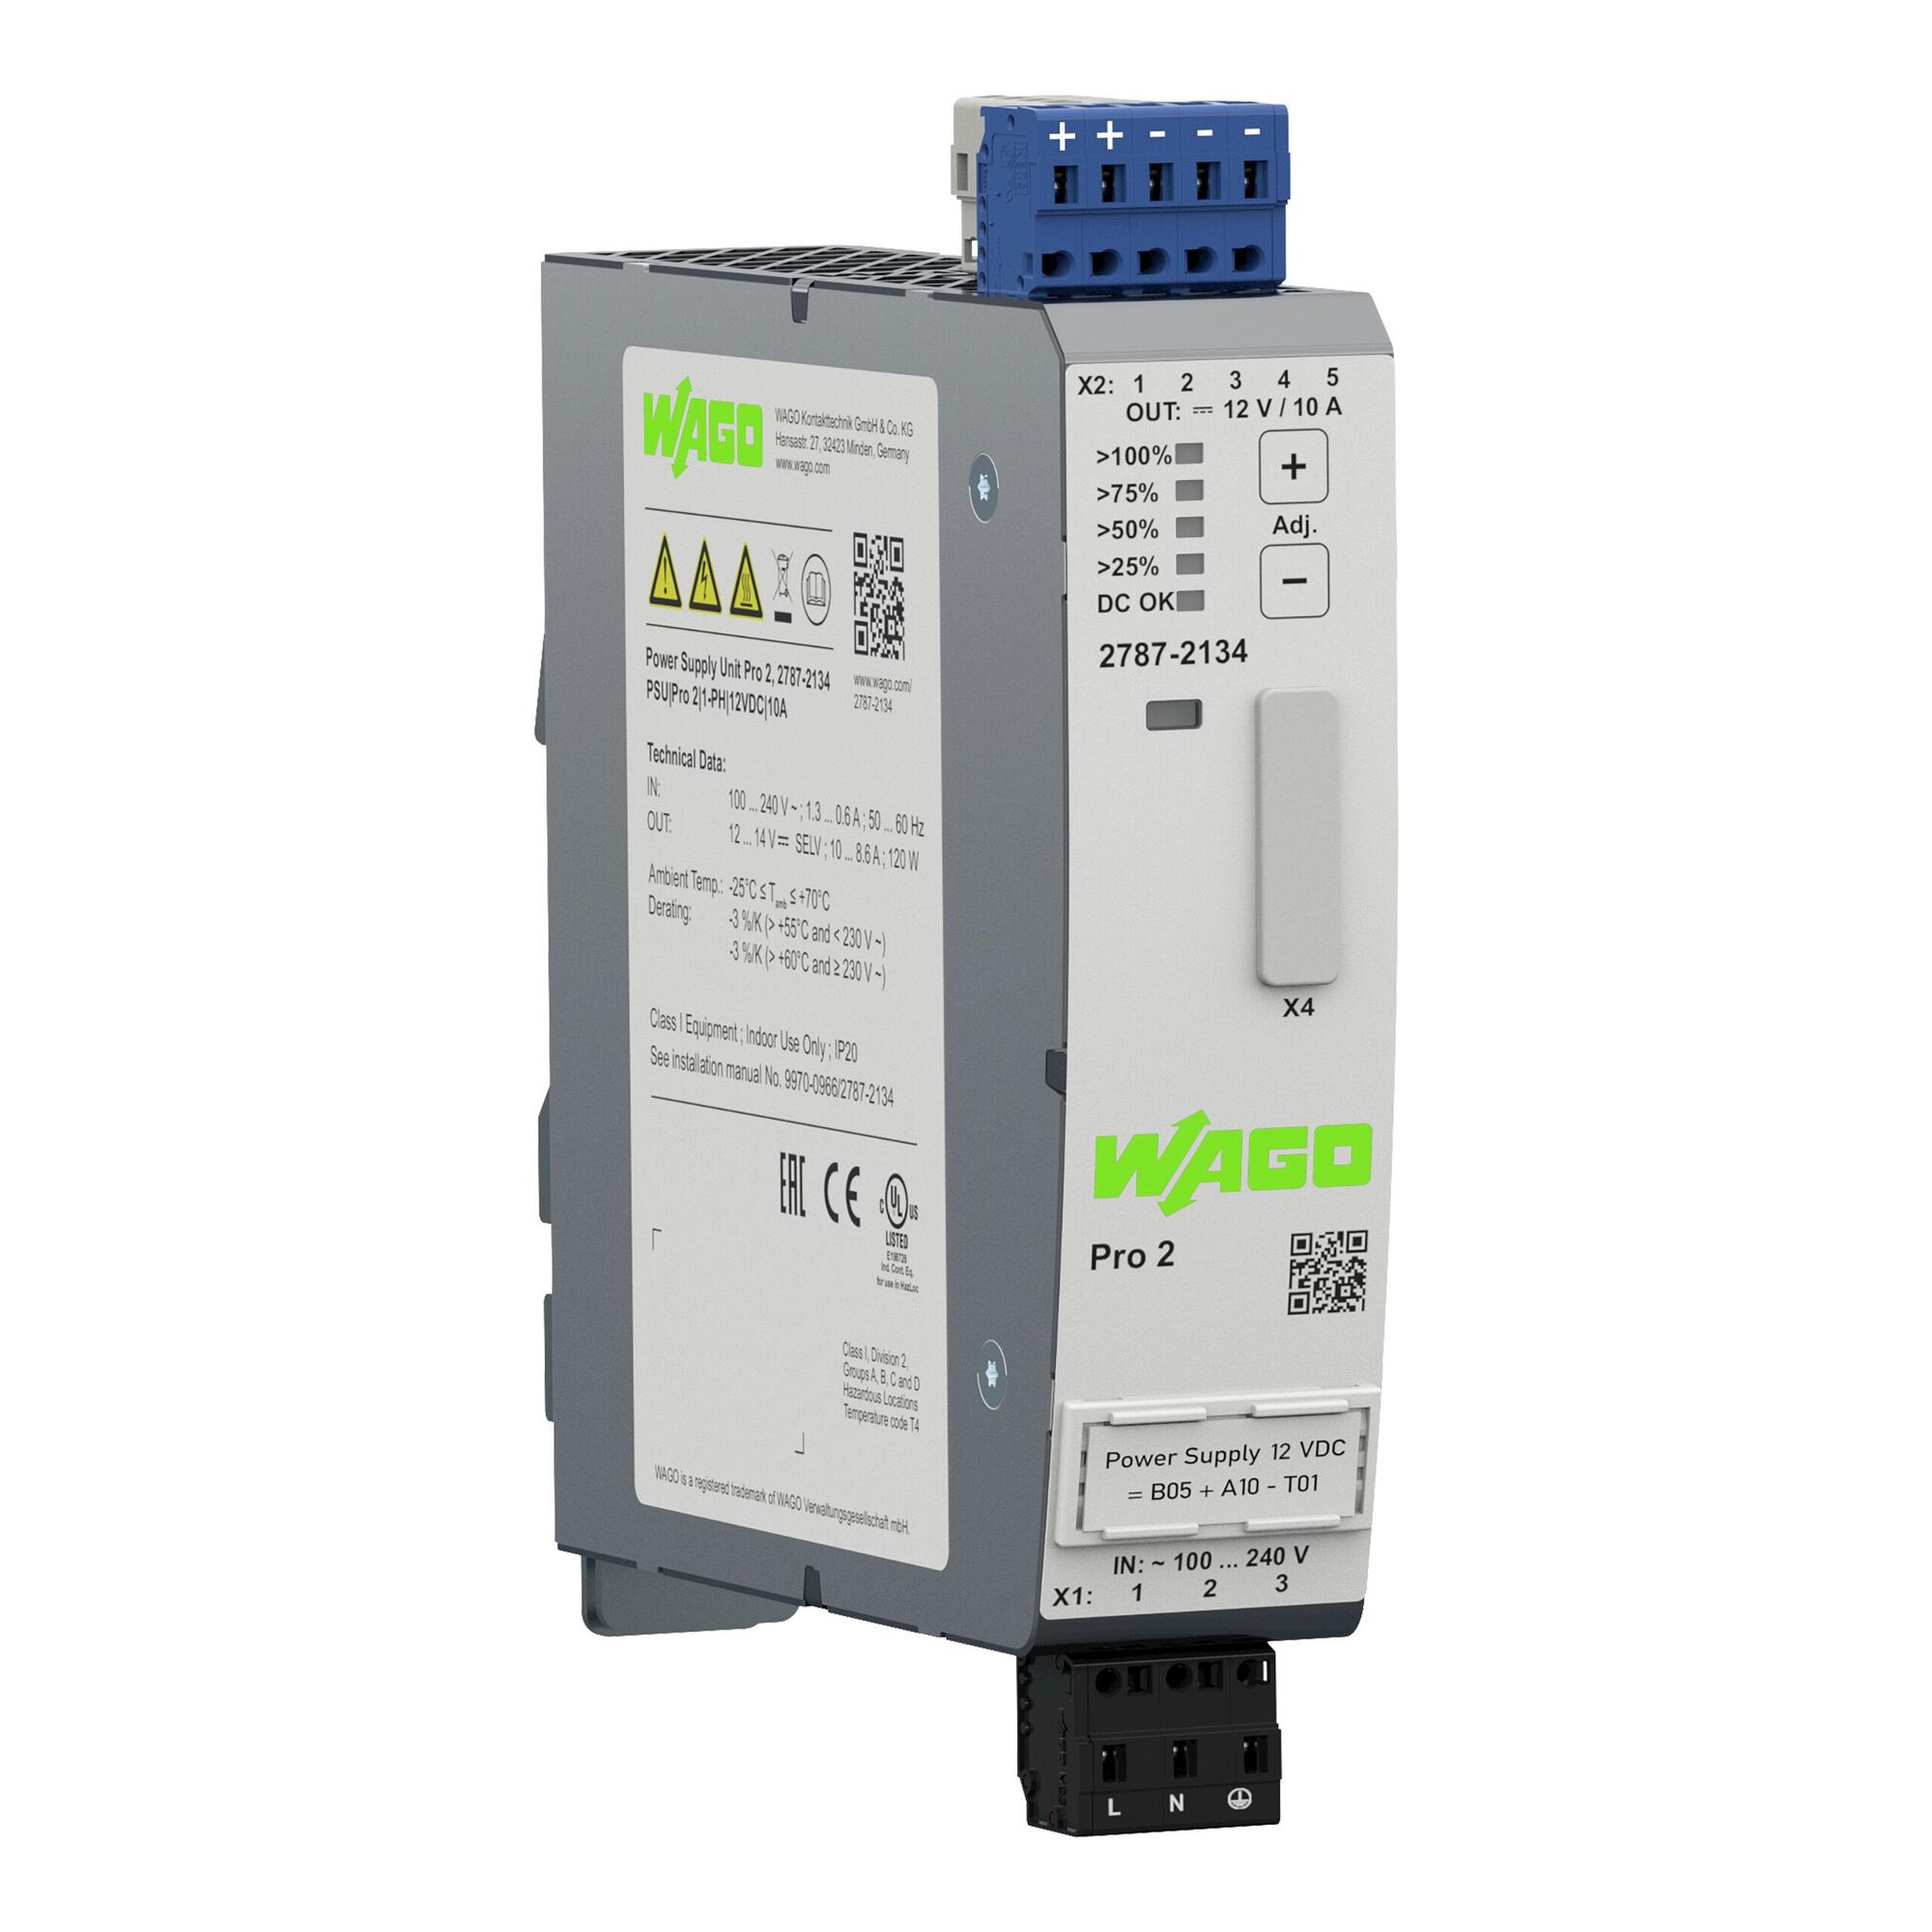 Power supply; Pro 2; 1-phase; 12 VDC output voltage; 10 A output current; TopBoost + PowerBoost; communication capability